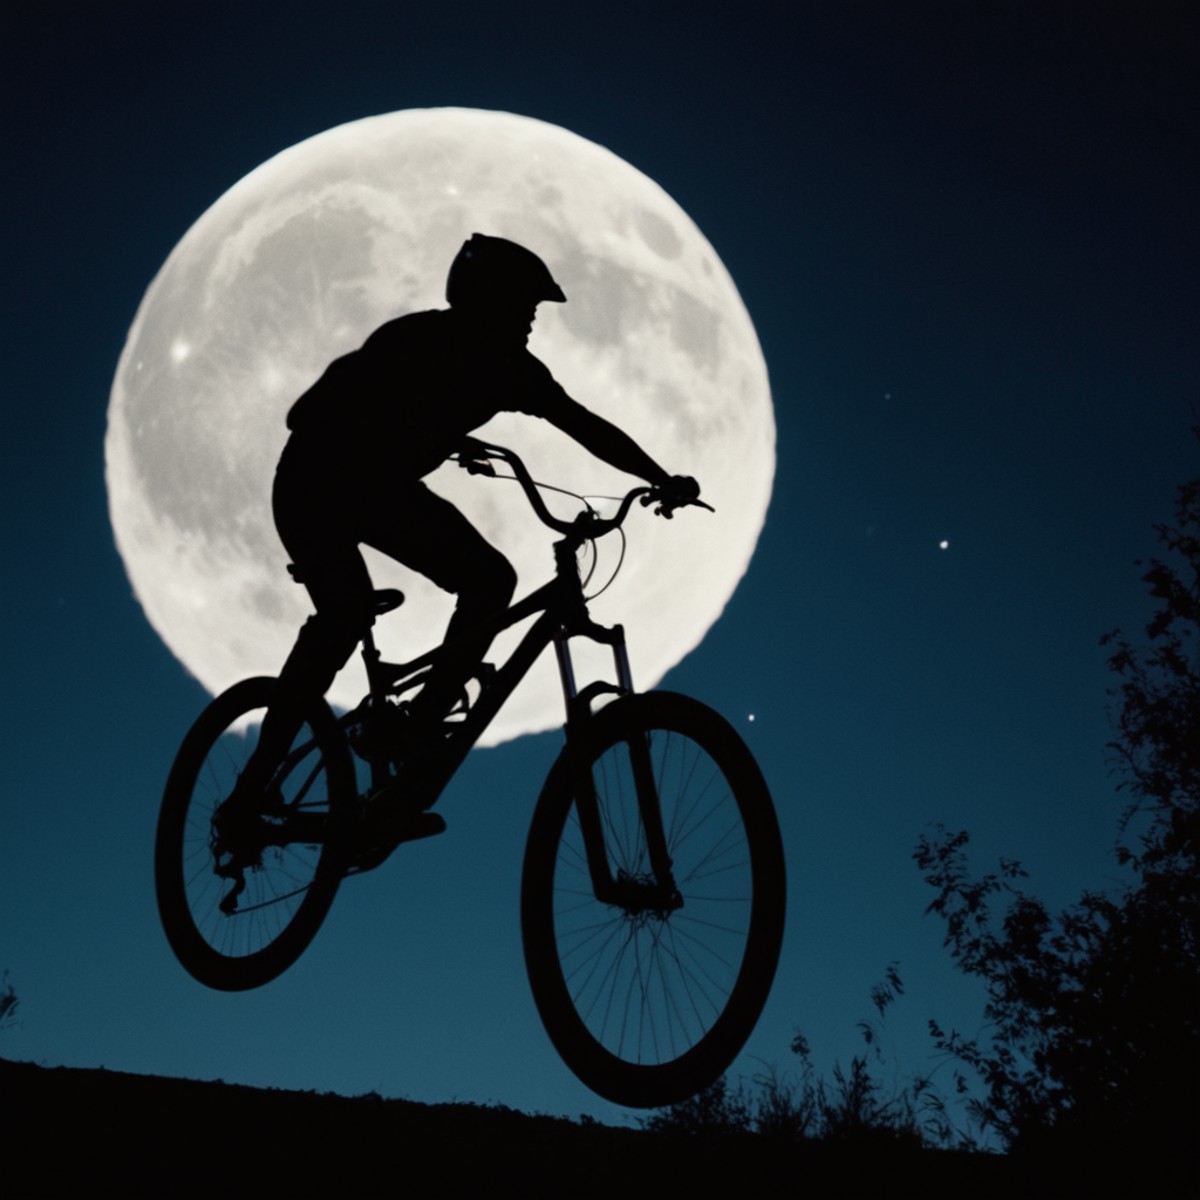 cinematic film still of  <lora:silhouette style:1>
A silhouette photo of a person on a bike in the air with a full moon in...